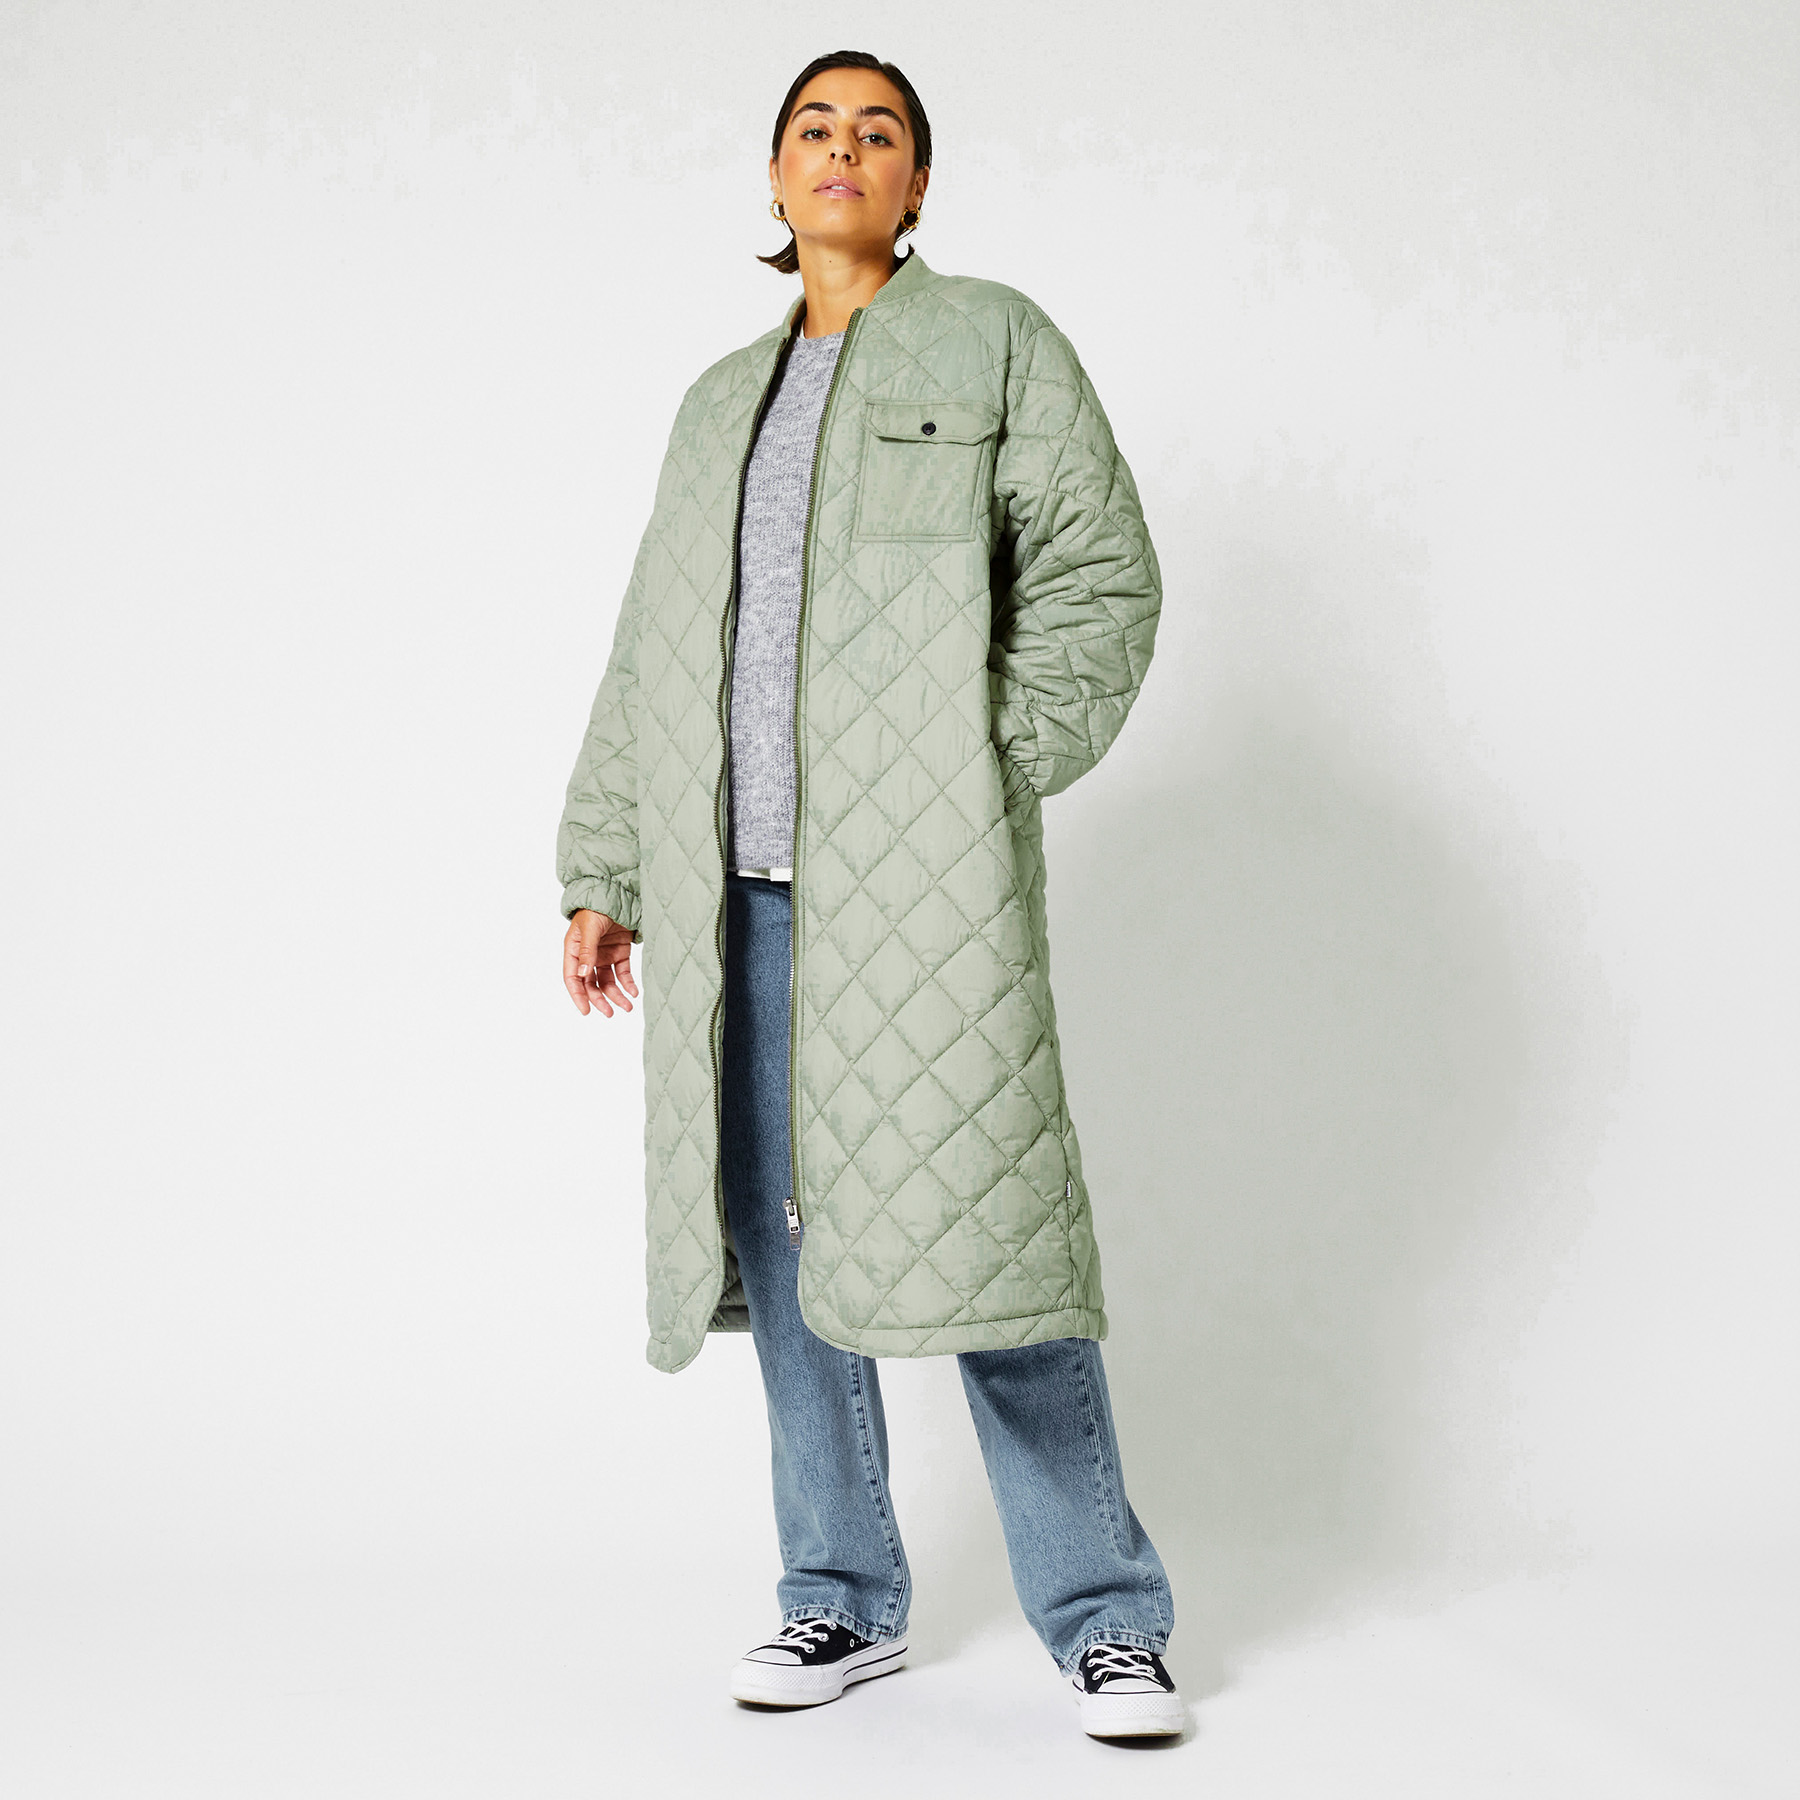 Women Jacket long quilted Green Buy Online